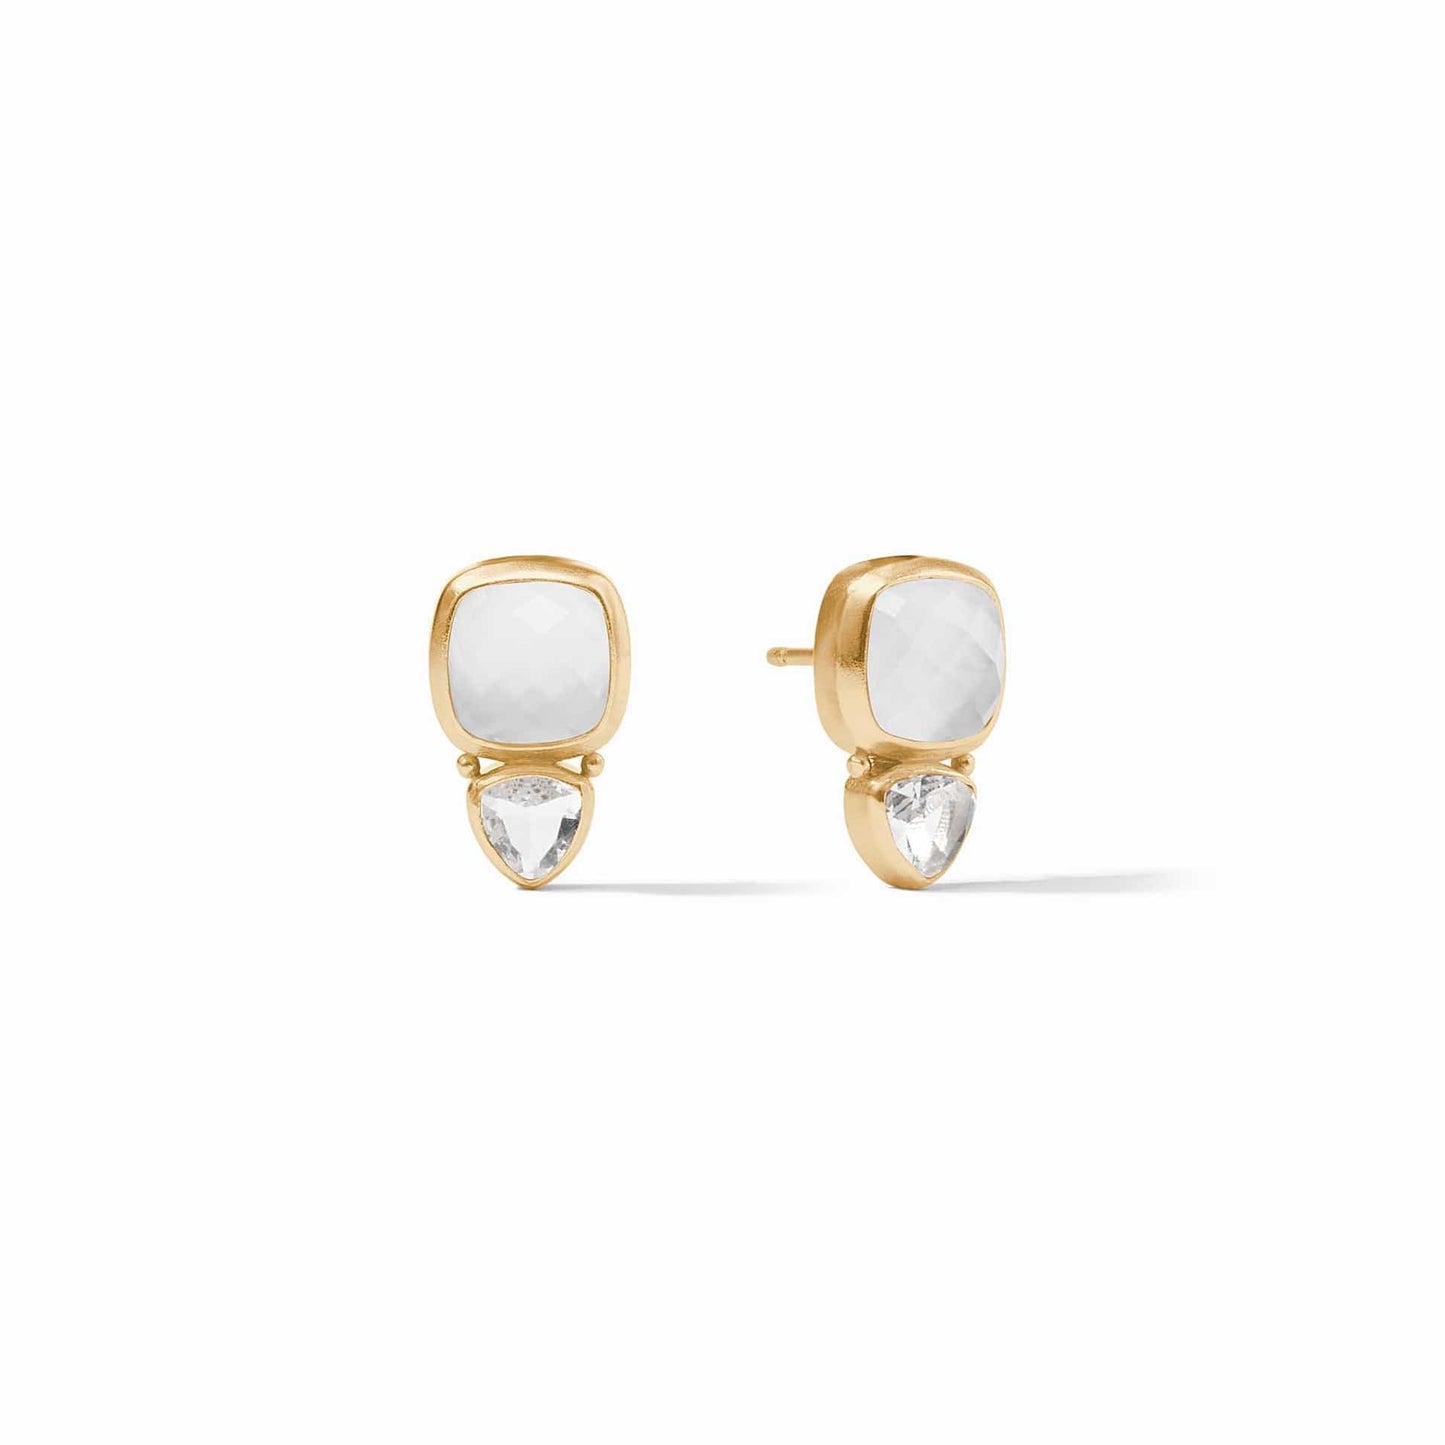 EAR-GPL Iridescent Clear Crystal Aquitaine Duo Stud Earrings